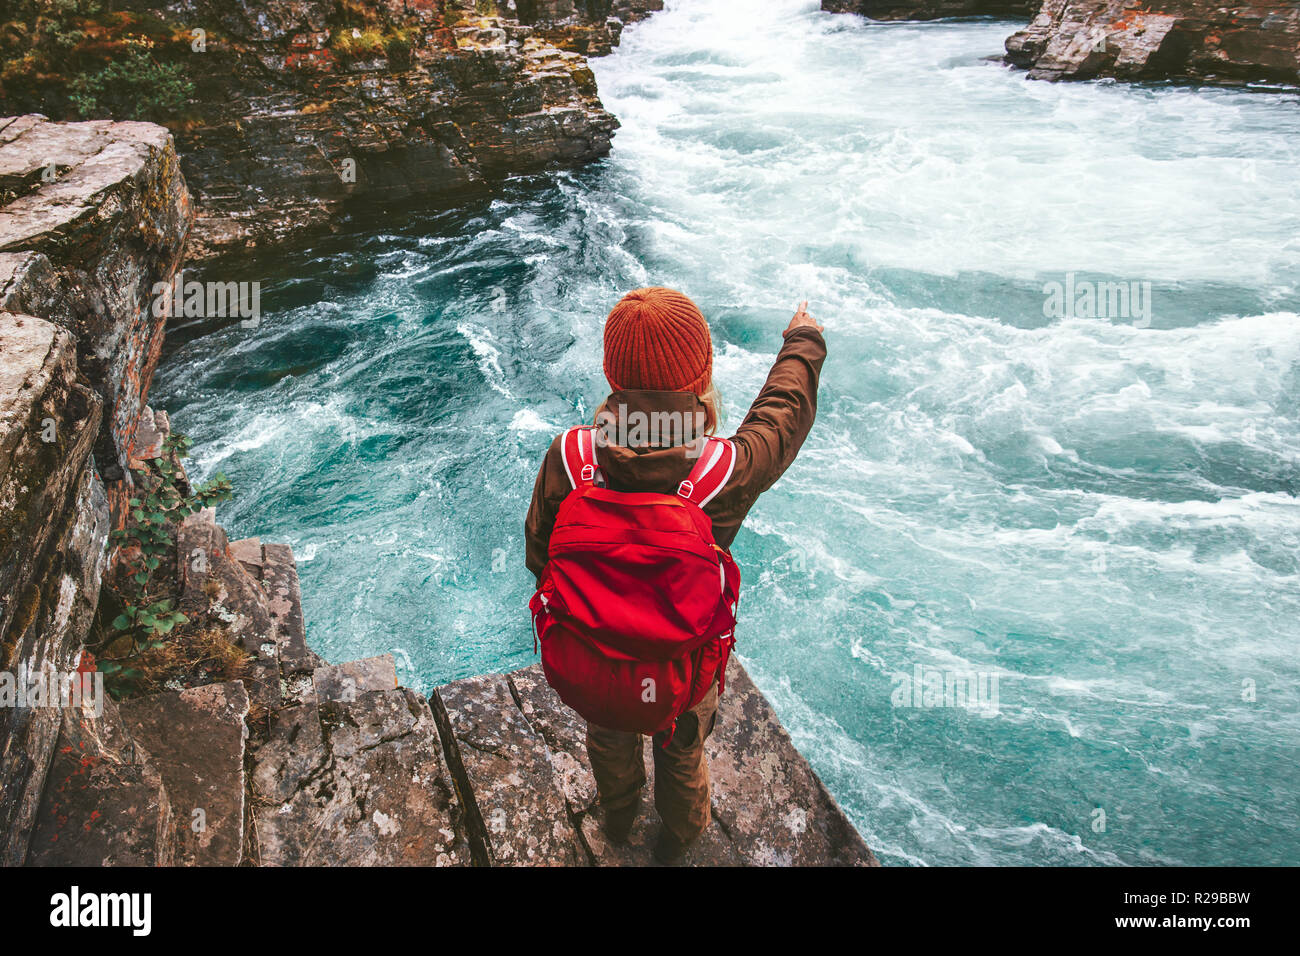 Backpacker traveling alone active  lifestyle hiking at river canyon adventure vacations outdoor woman hand showing location Stock Photo